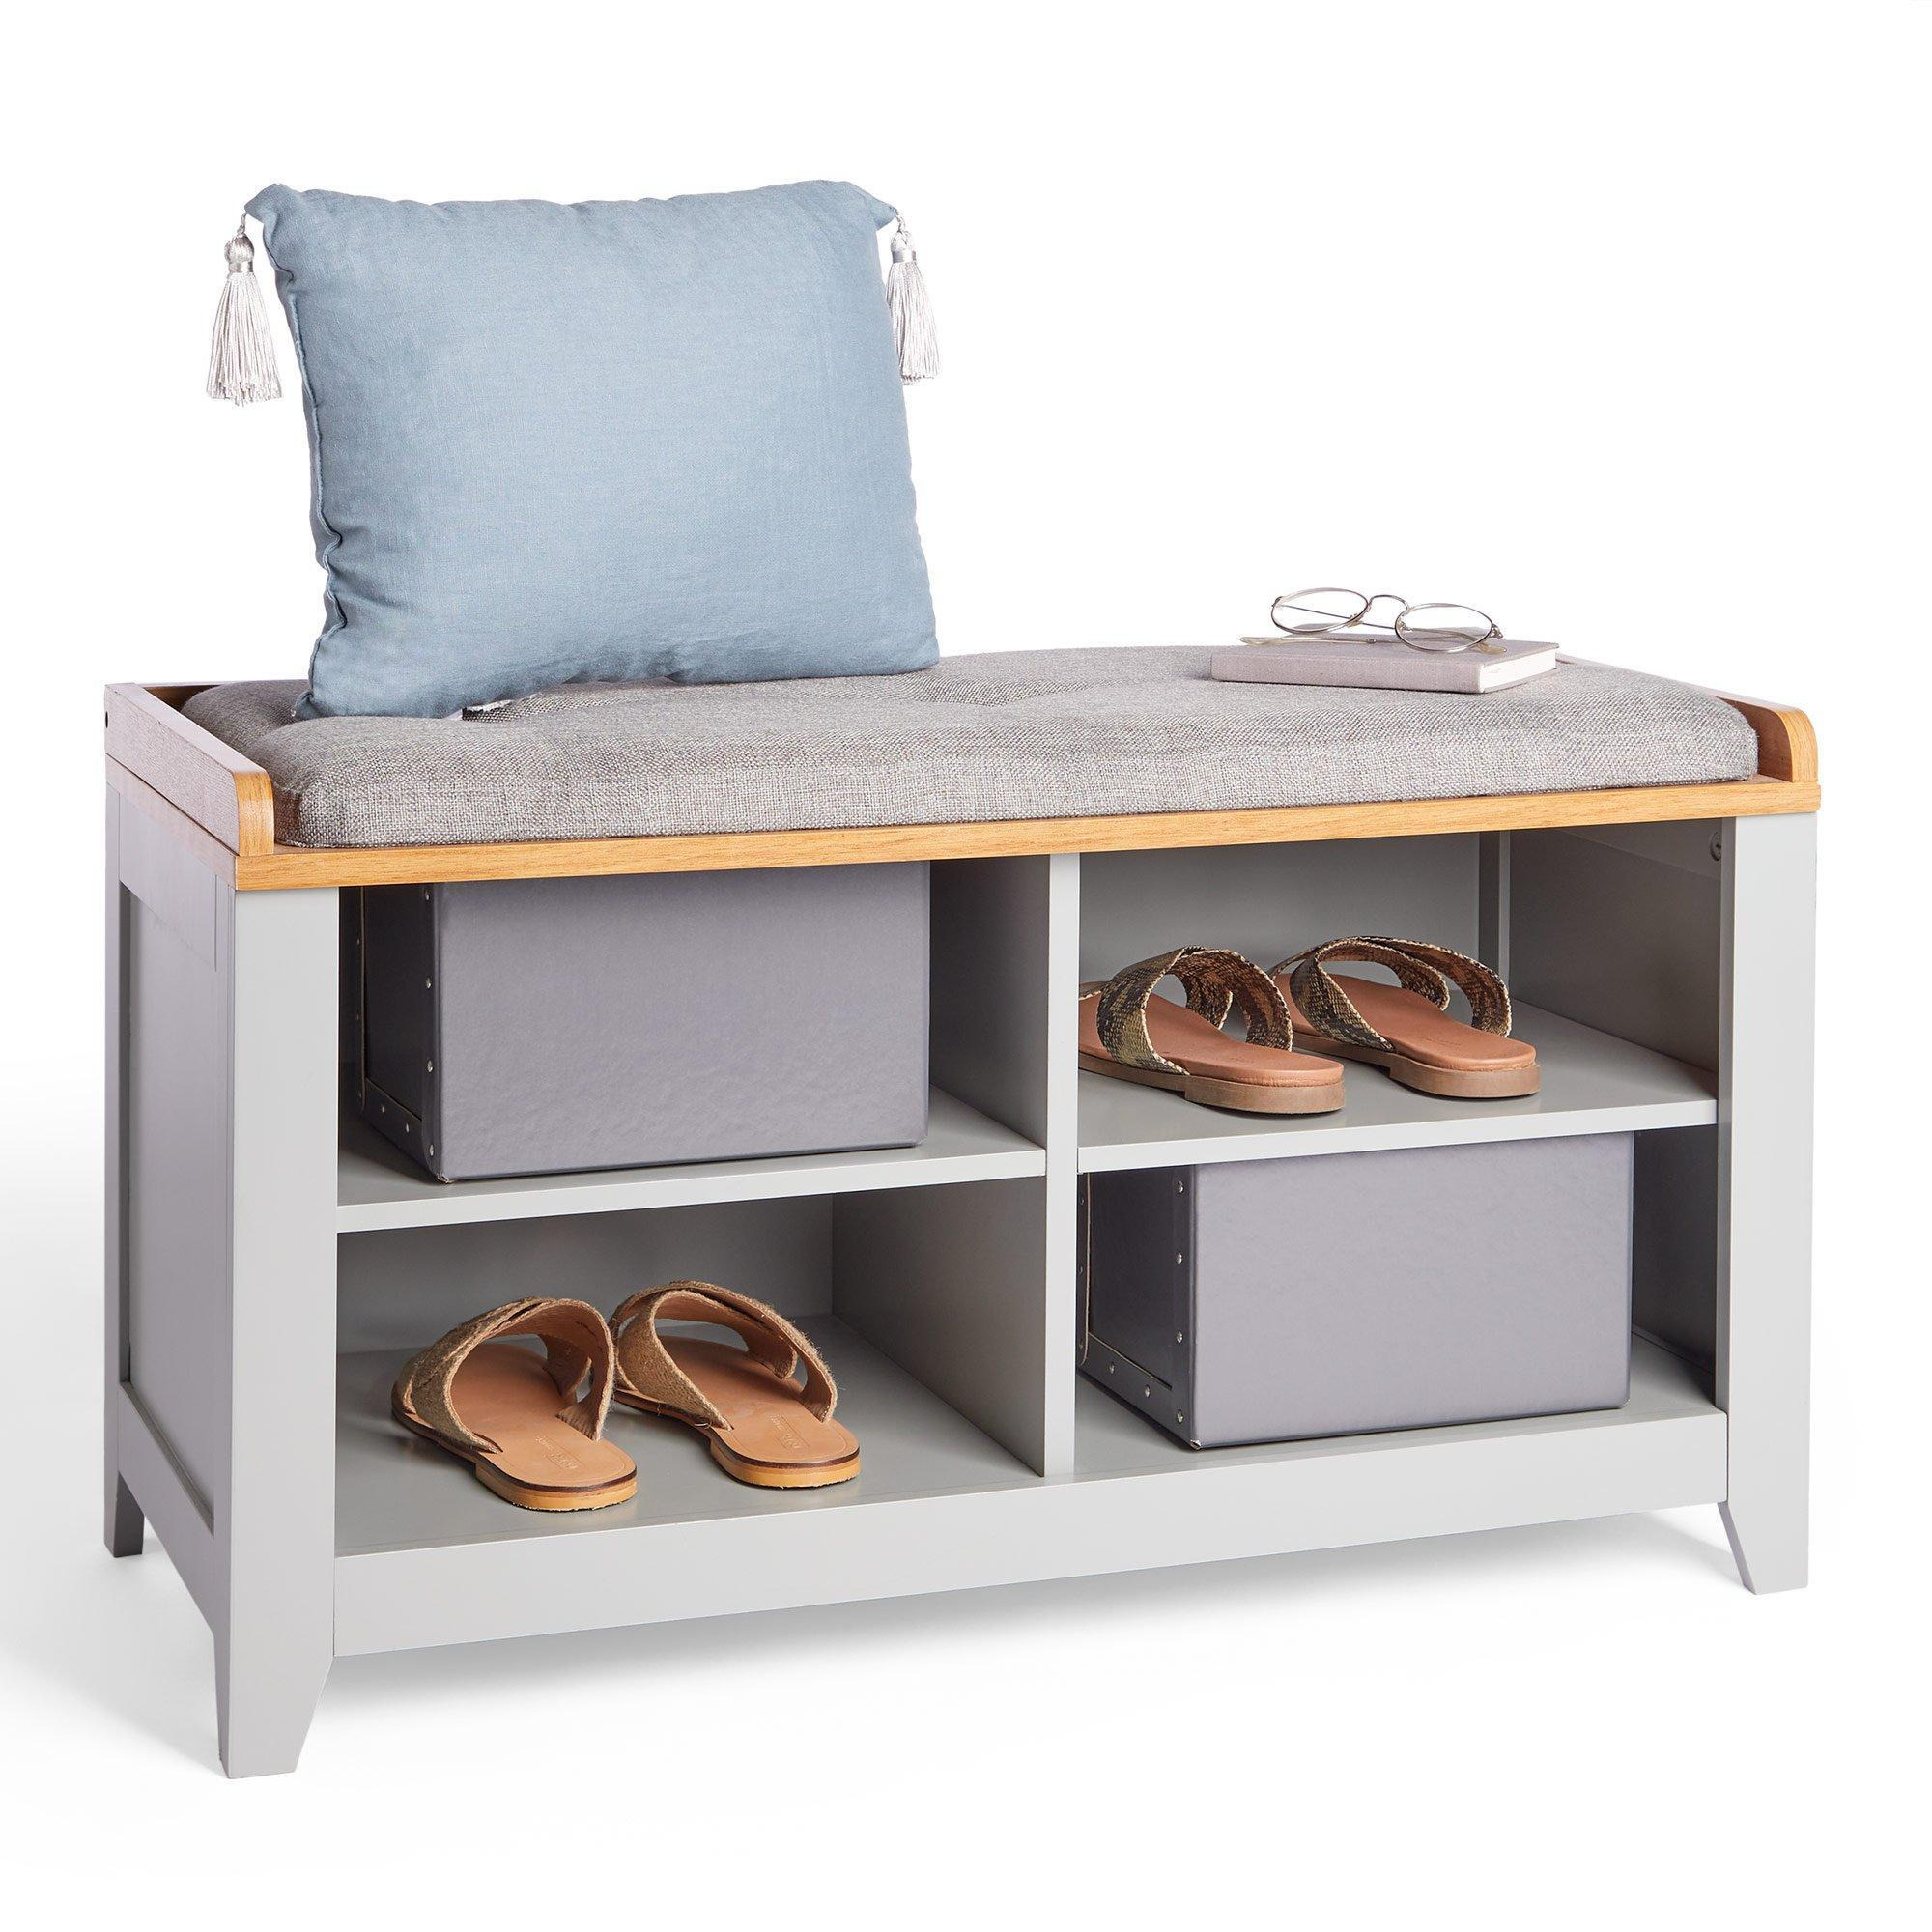 Padded Seat Hallway Storage Bench with 4 Shelves - image 1